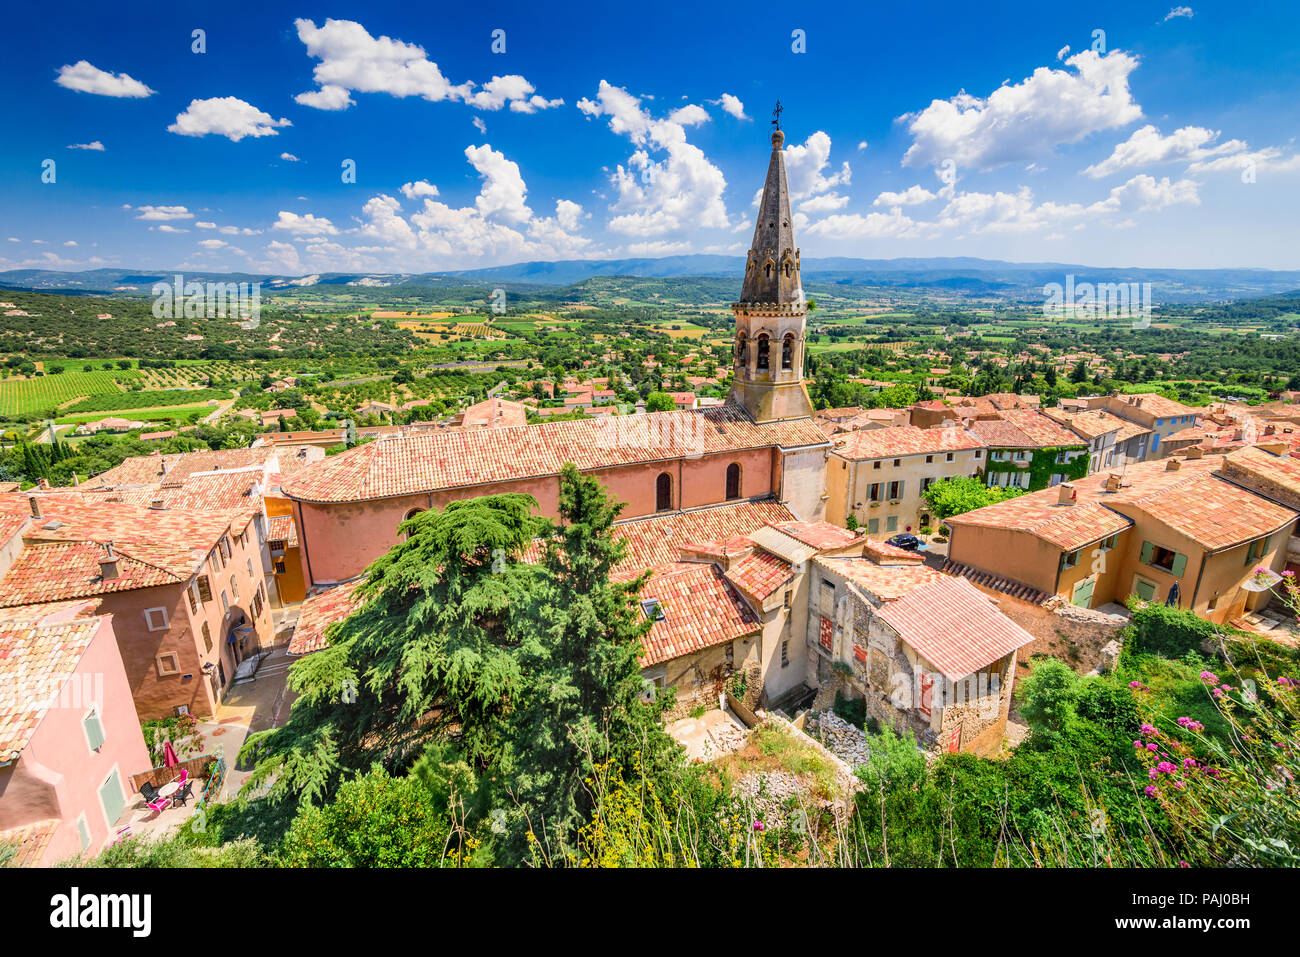 Panorama of Saint-Saturnin-les-Apt, France, with tower and building of the St. Etienne church. Provence village. Stock Photo